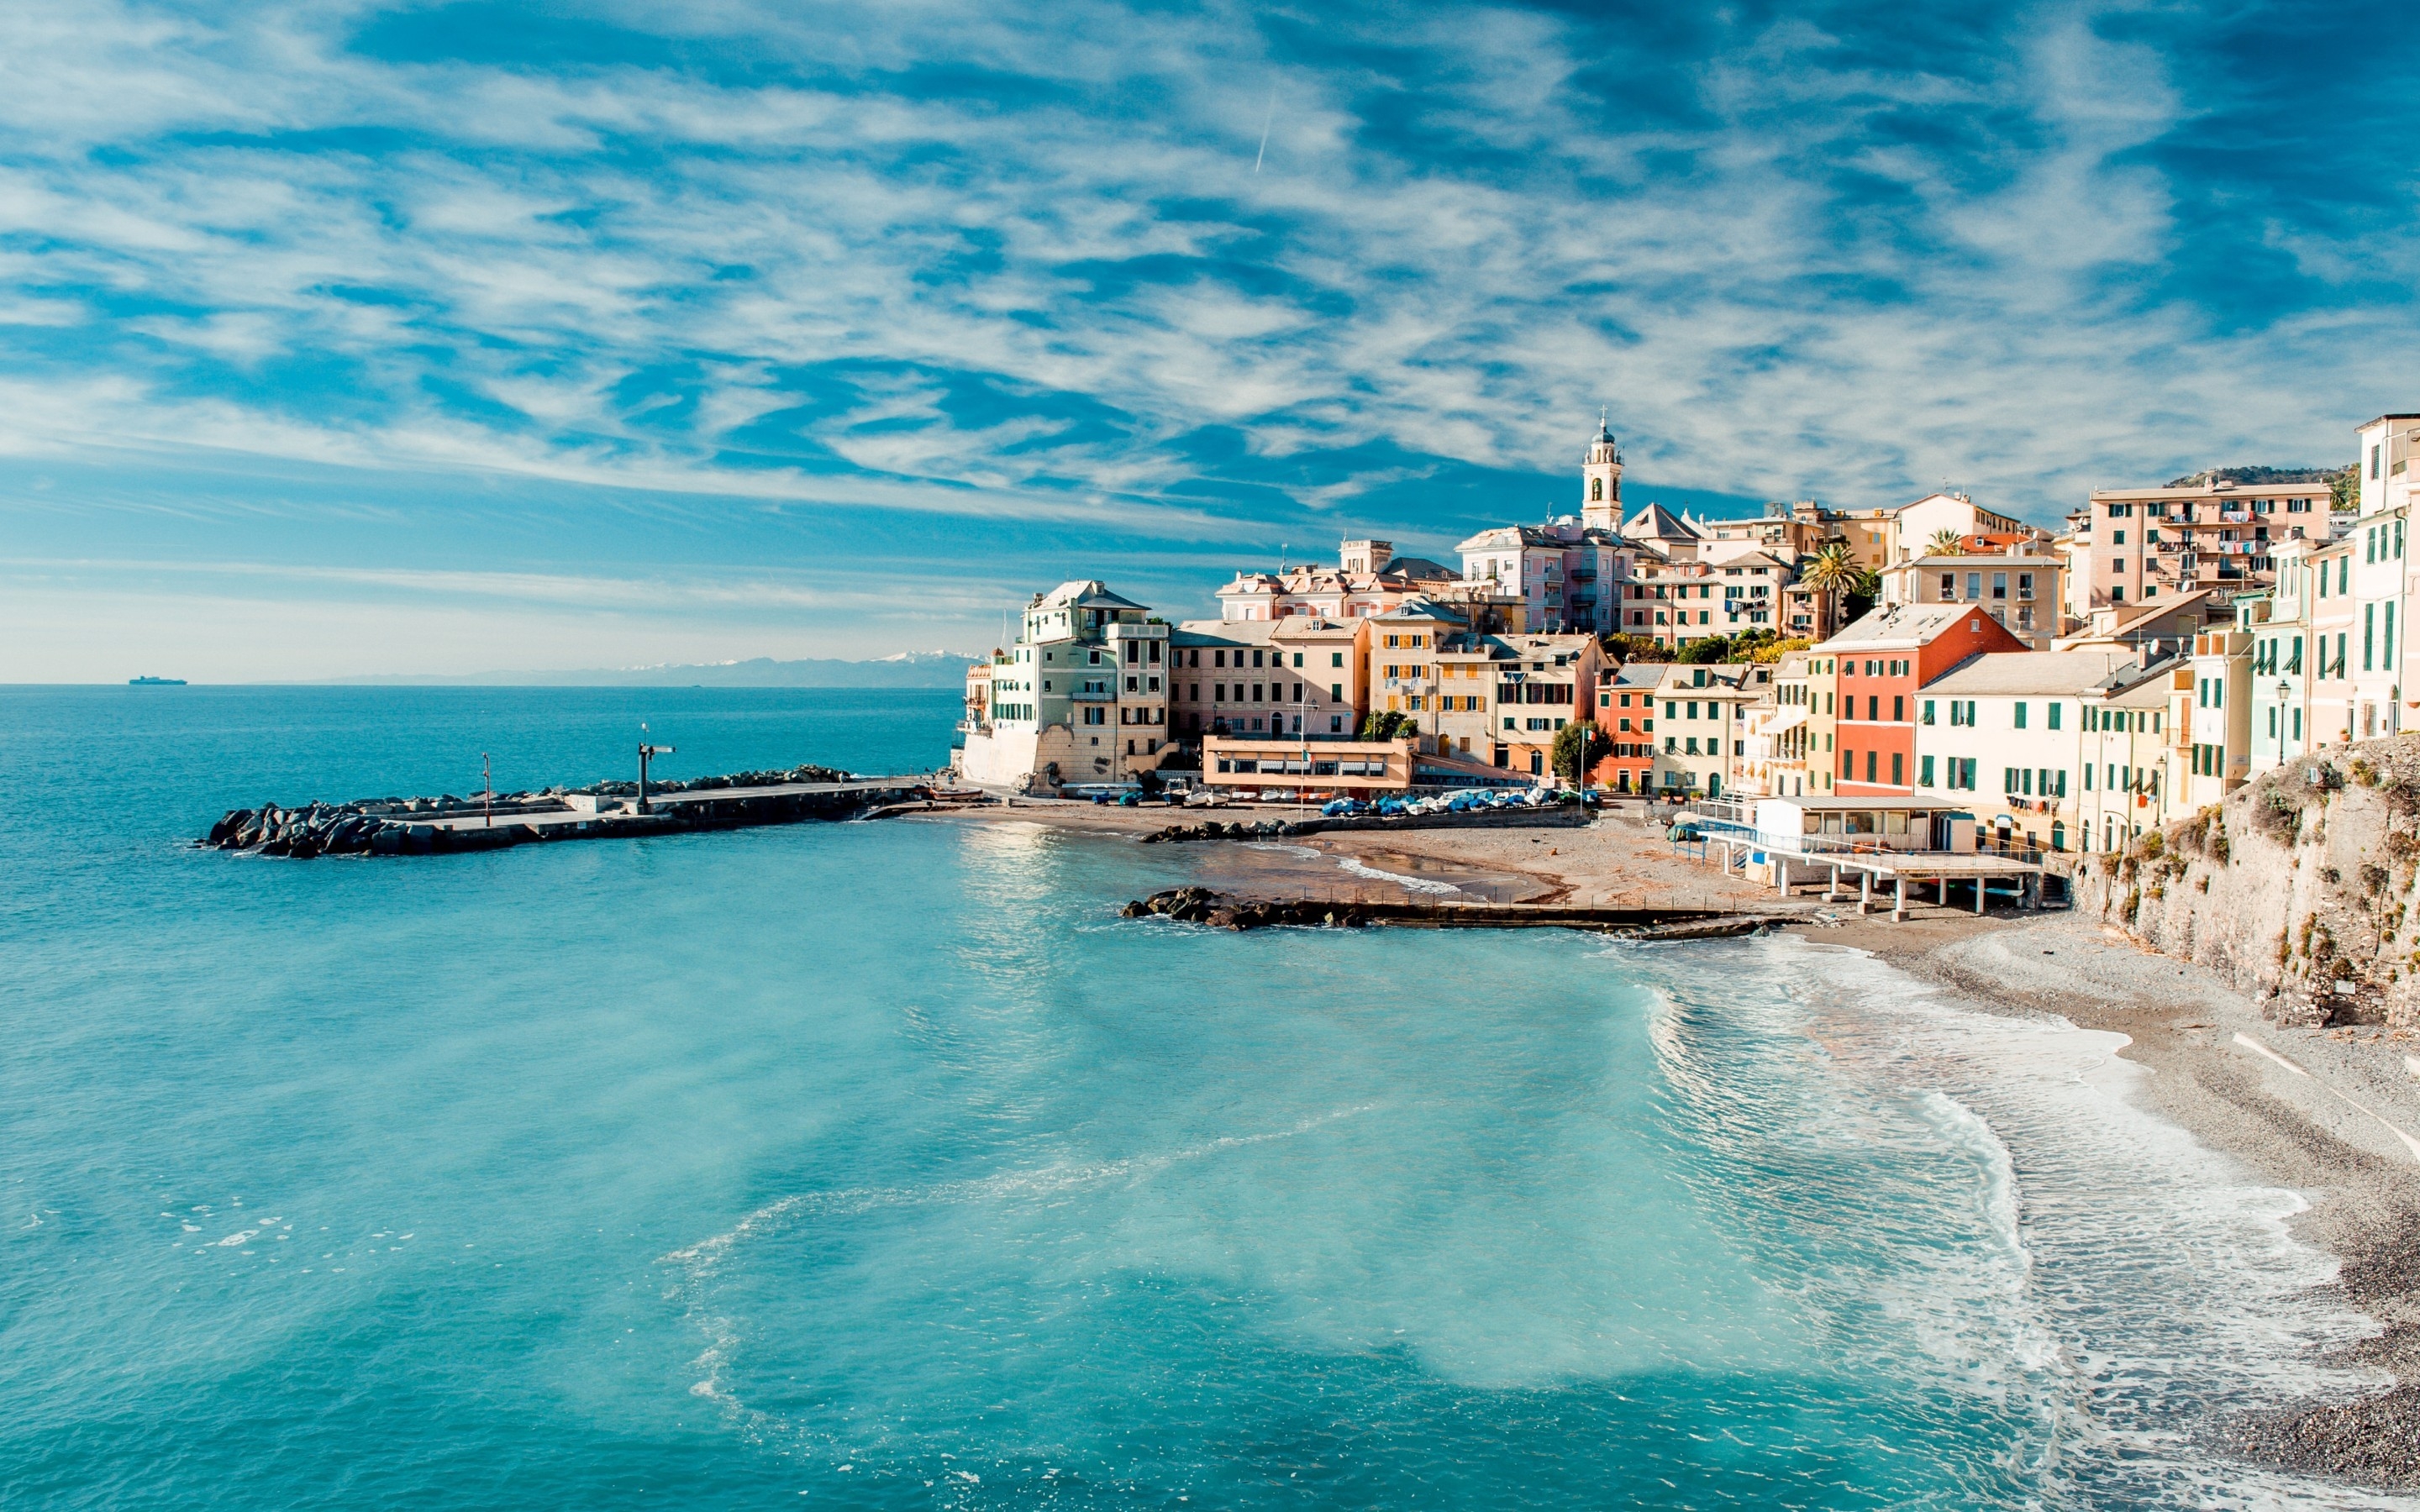 The Cinque Terre View for 2880 x 1800 Retina Display resolution